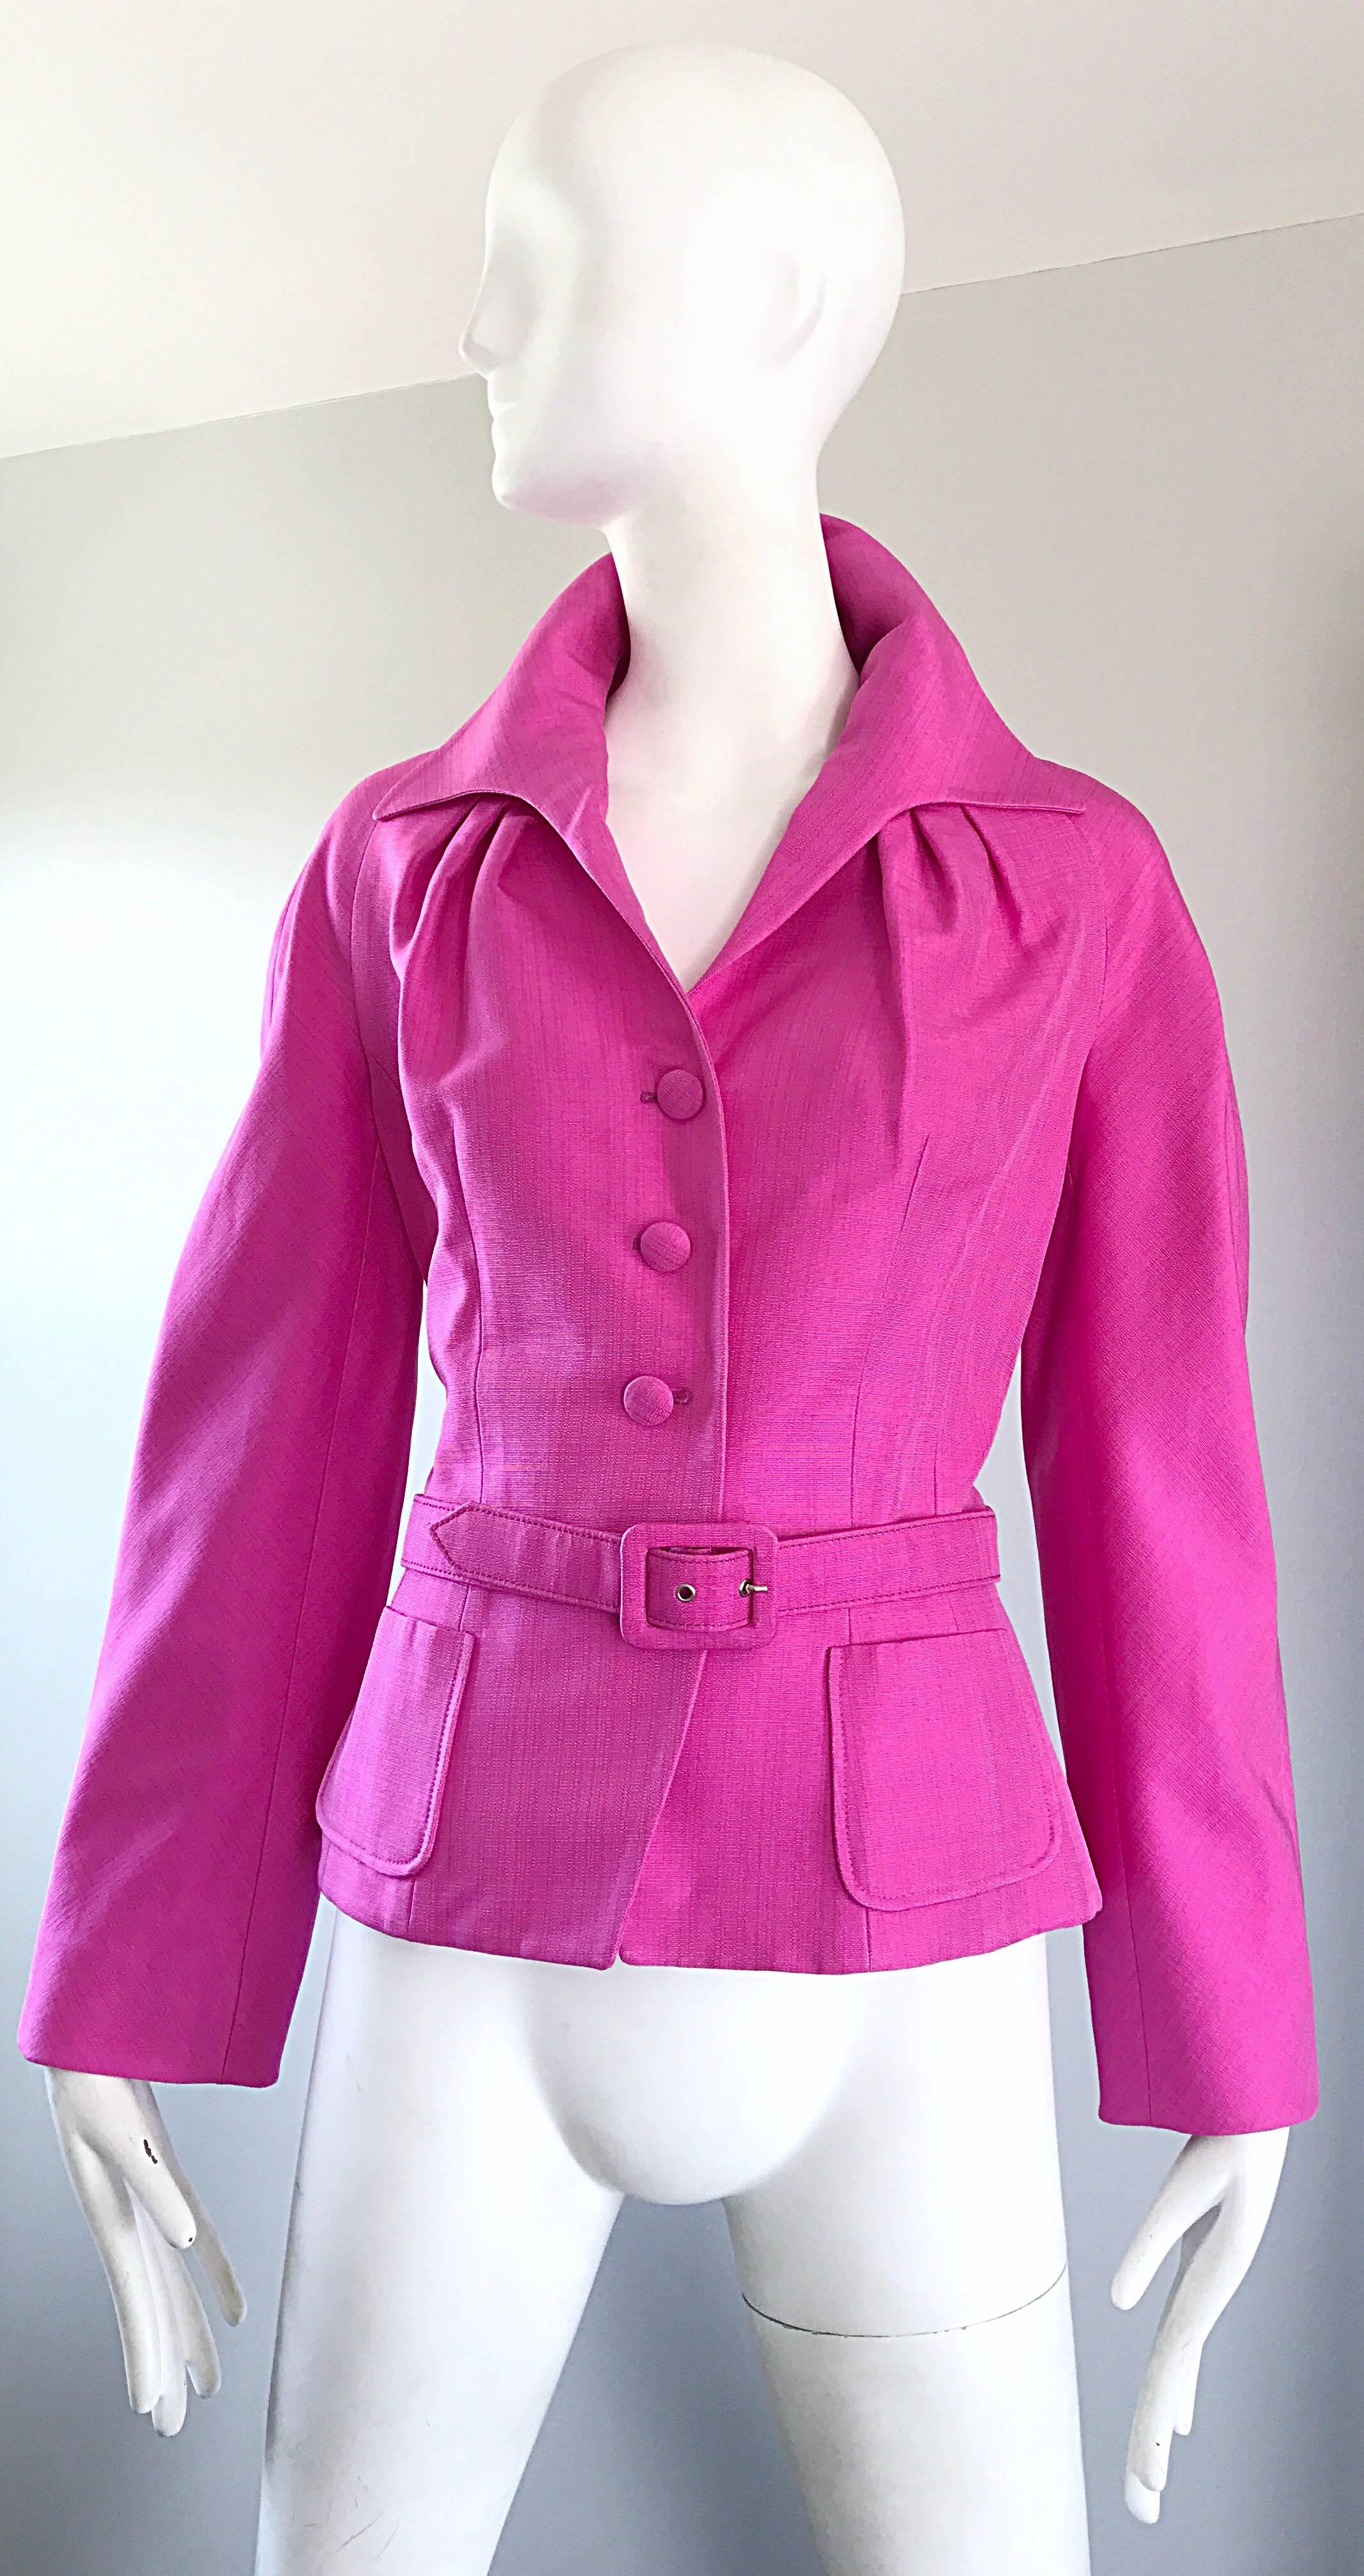 Fabulous vintage CHRISTIAN DIOR, by JOHN GALLIANO bubblegum hot pink belted silk blend jacket! Wonderful silk blend; 65% Viscose, 35% Silk, and fully lined in silk. Features three exterior fabric covered buttons, along with one hidden interior